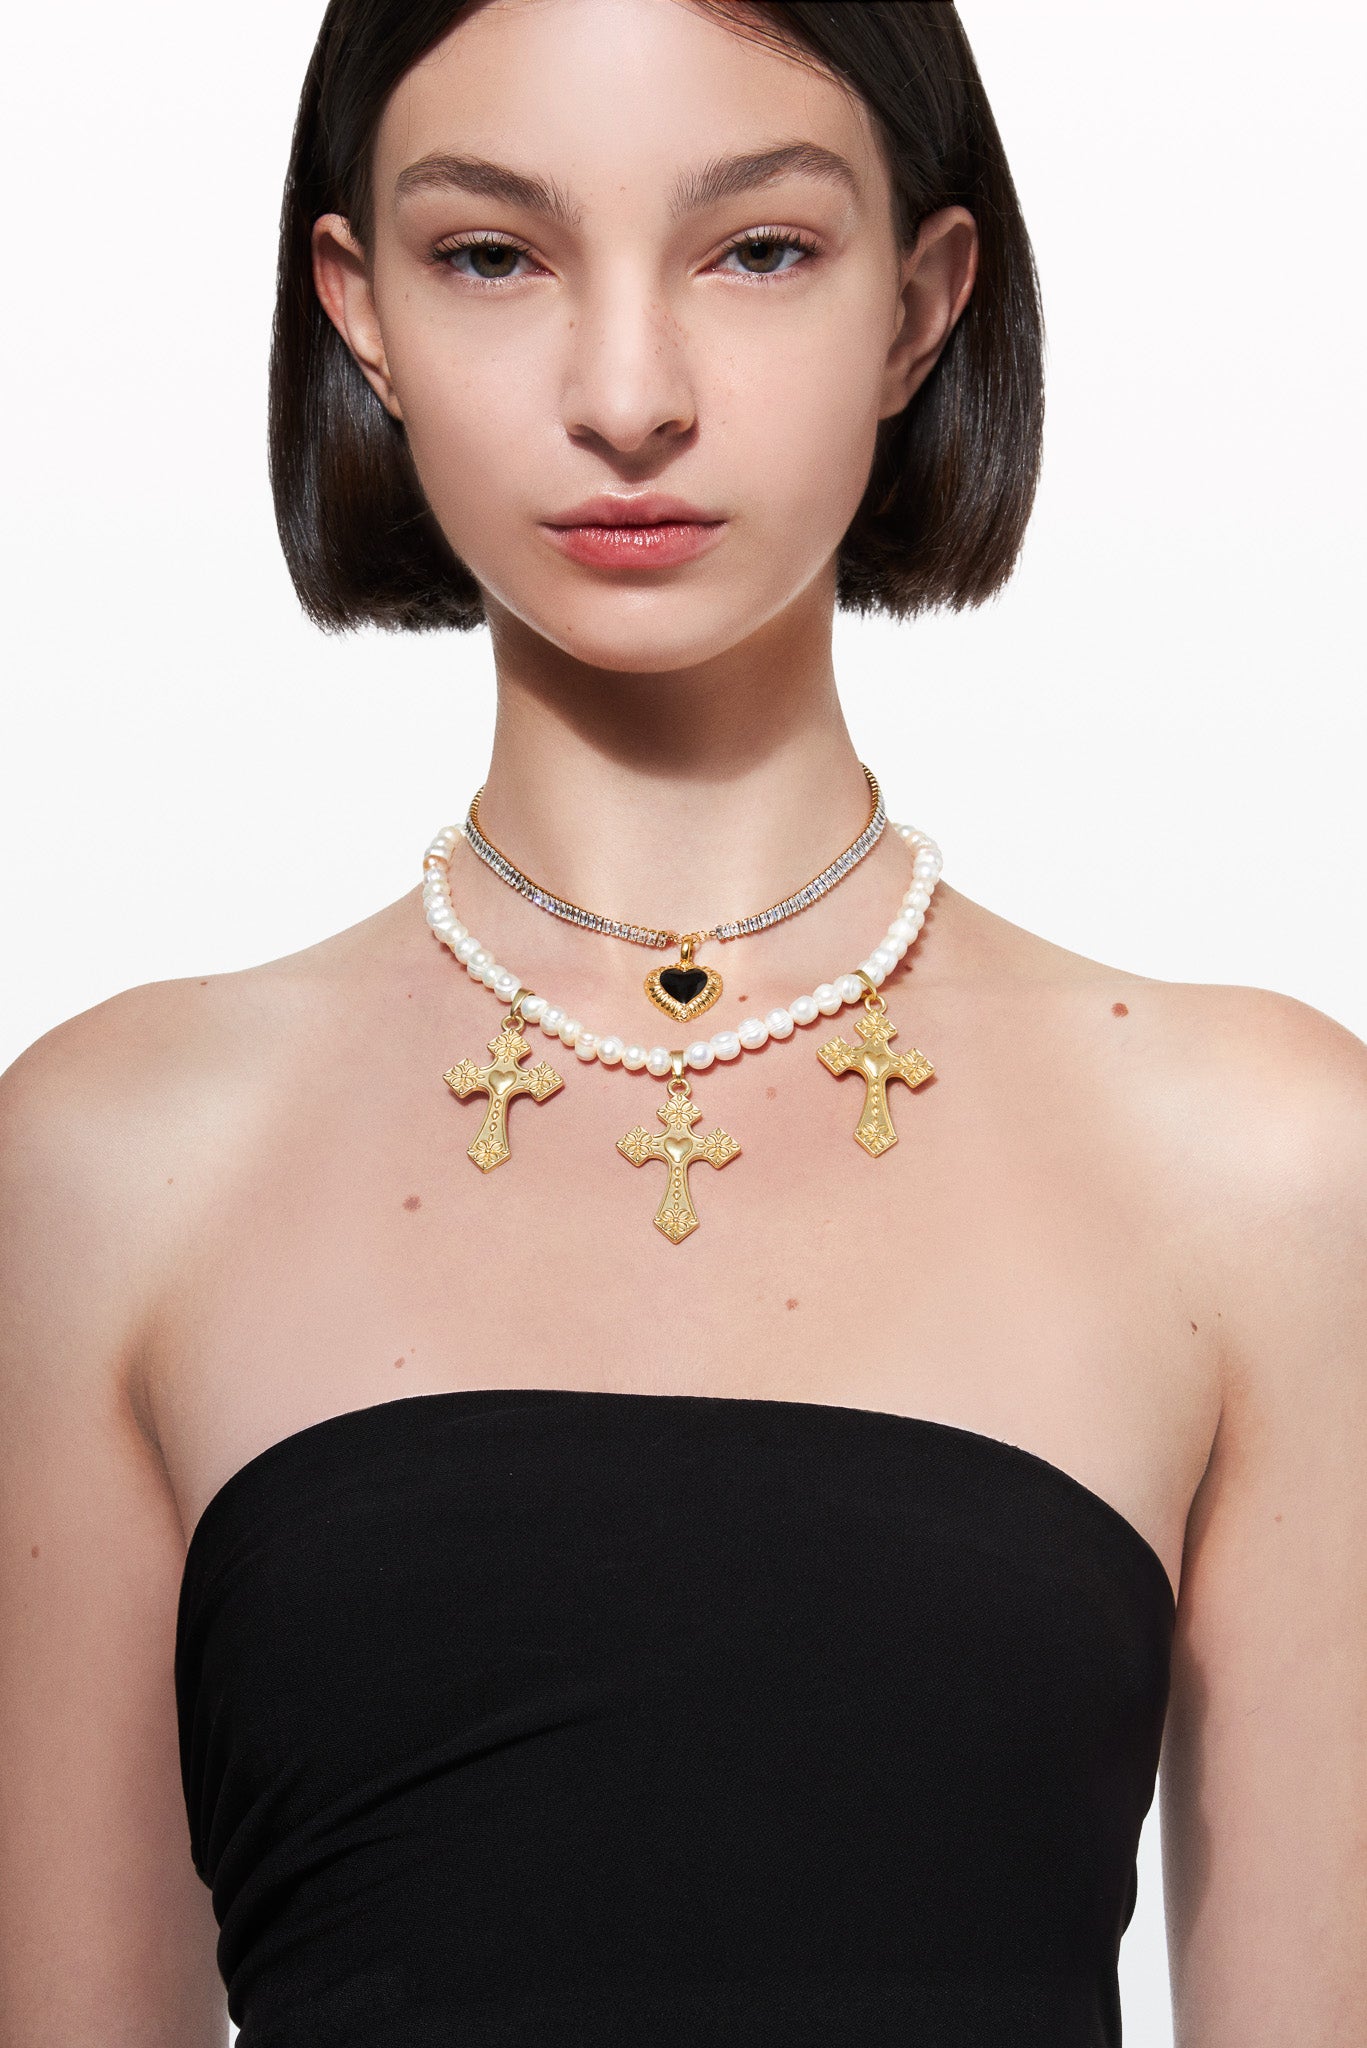 Louis Vuitton Blooming Supple Necklace - YouTube